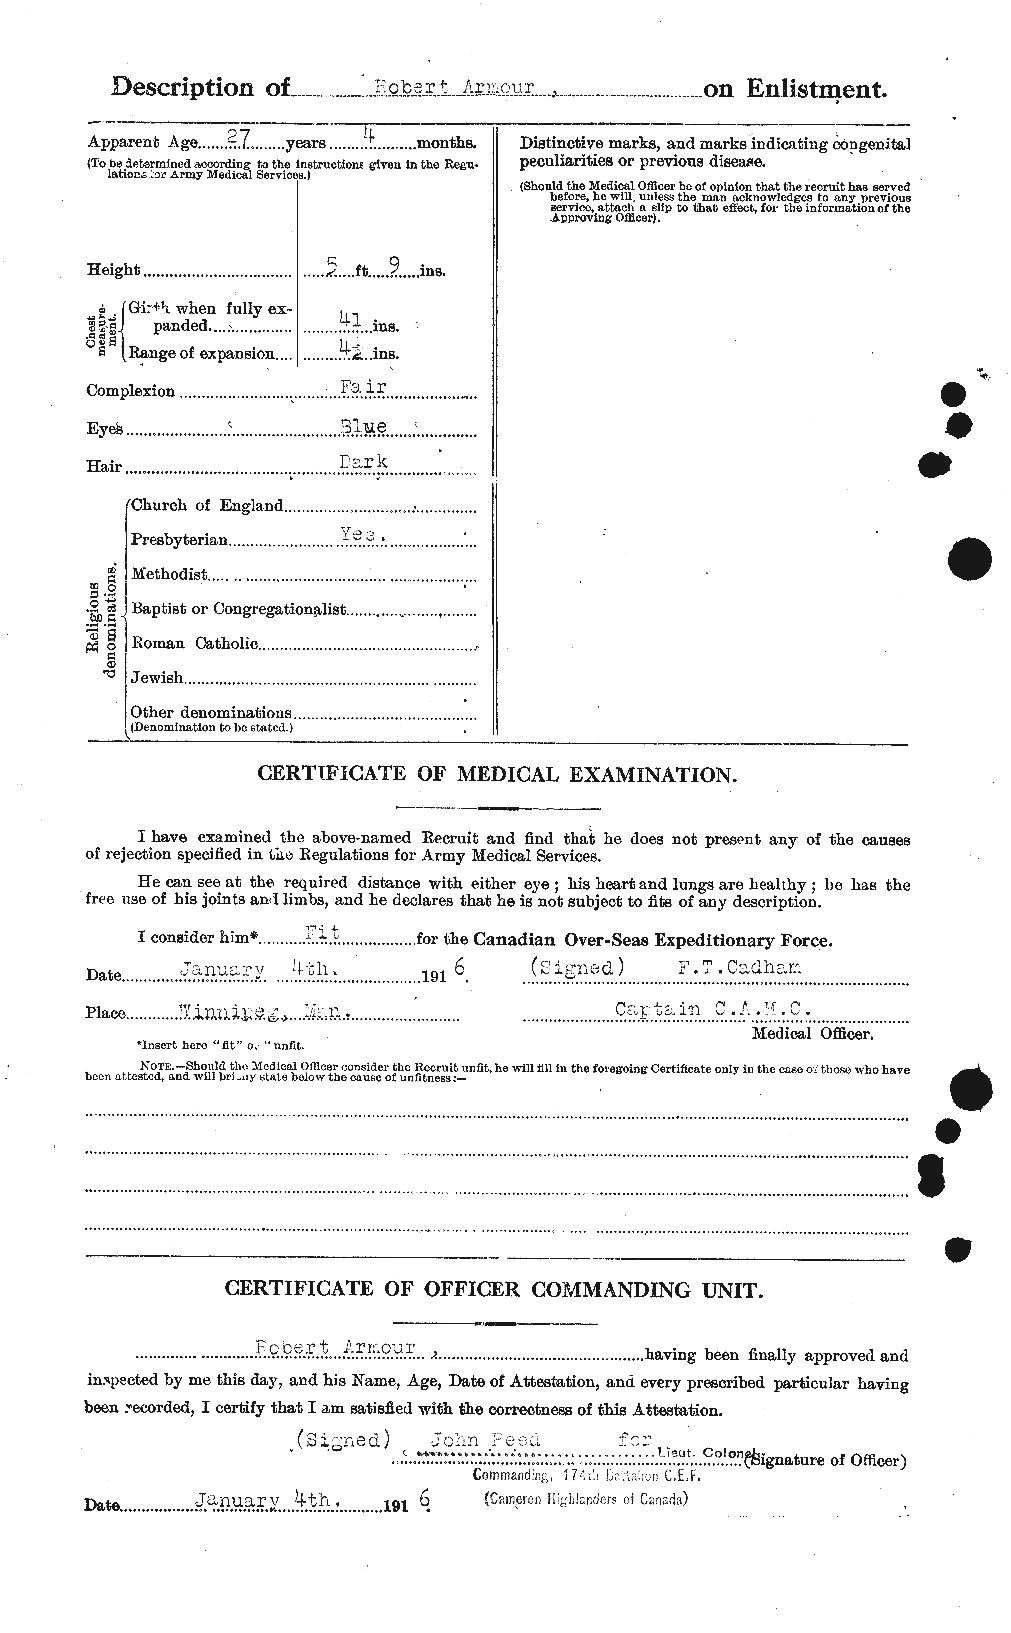 Personnel Records of the First World War - CEF 214048b